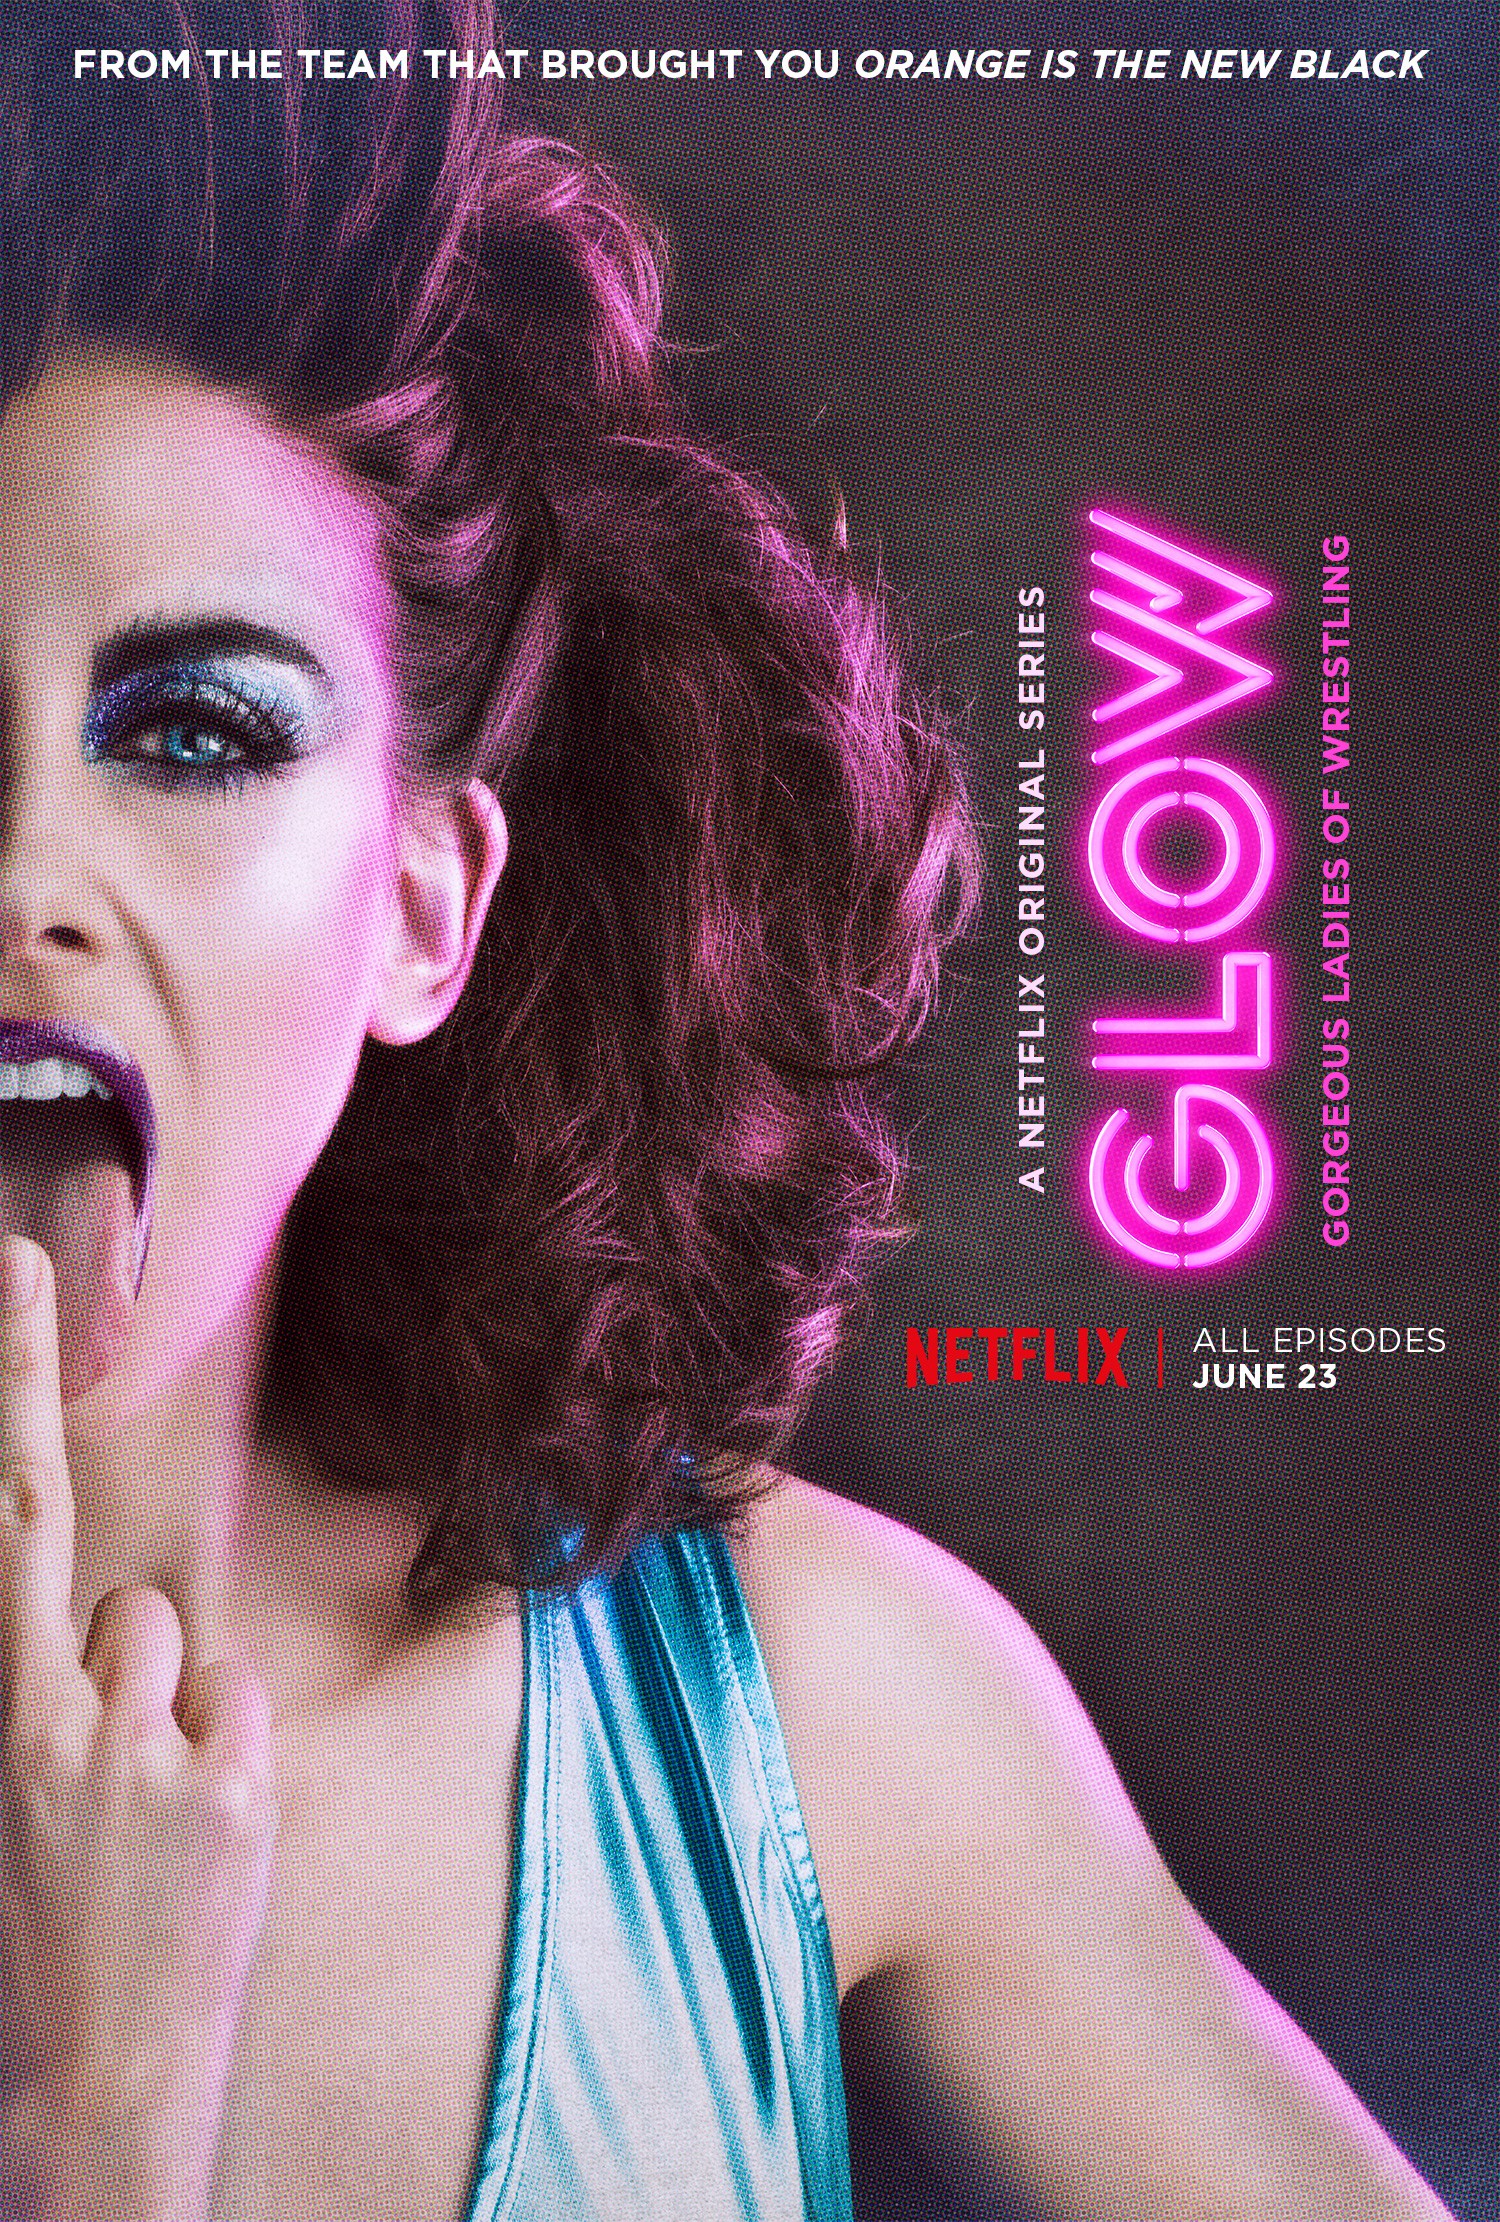 GLOW' Season 1: Watched It All? Let's Talk - The New York Times